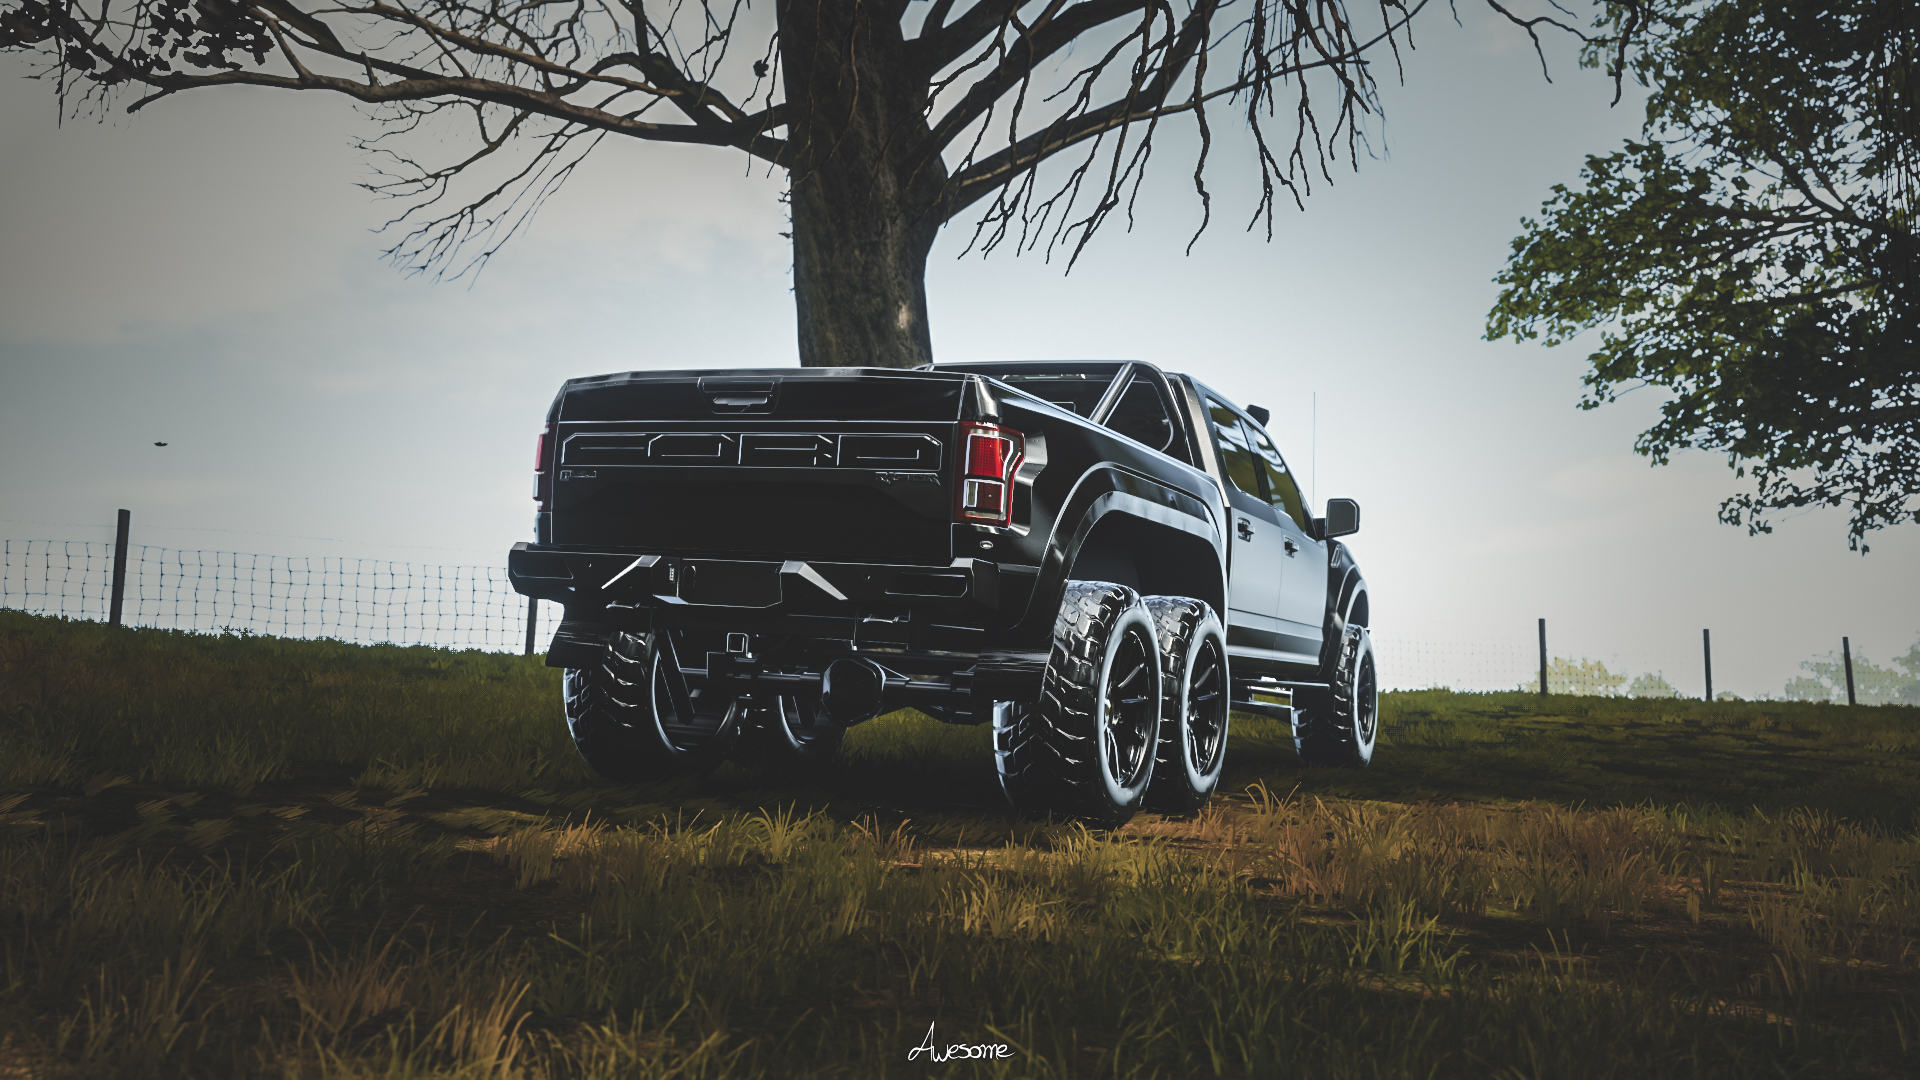 General 1920x1080 Ford hennessey velociraptor 6x6 Hennessey car vehicle Forza Forza Horizon 4 video games Ford Raptor 6x6